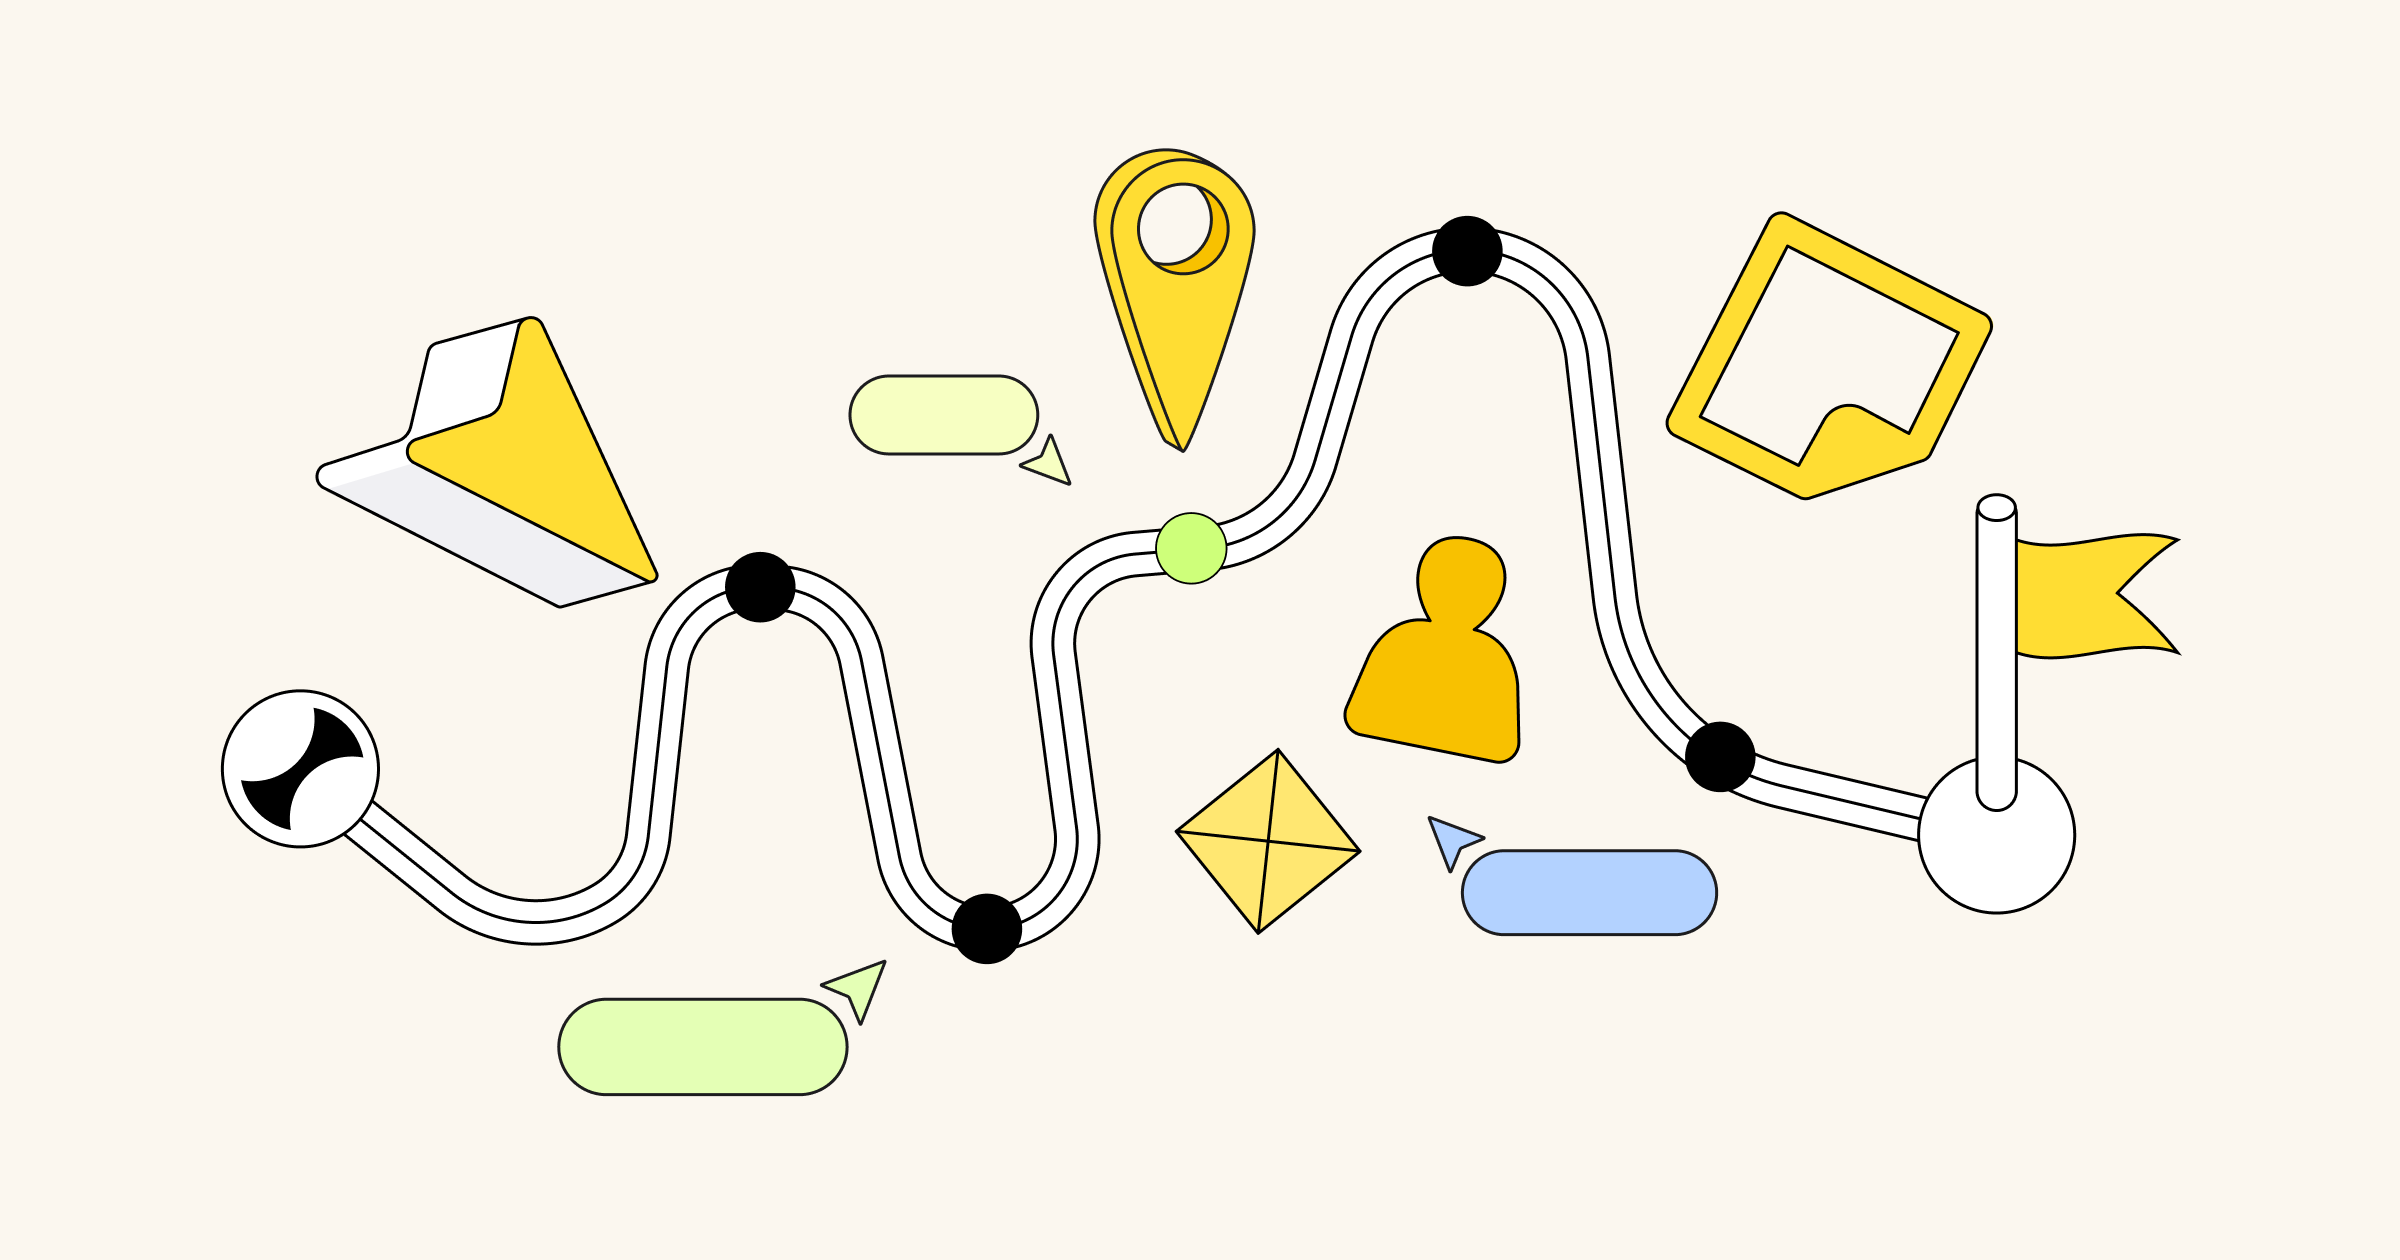 An abstract illustration of a stakeholder map